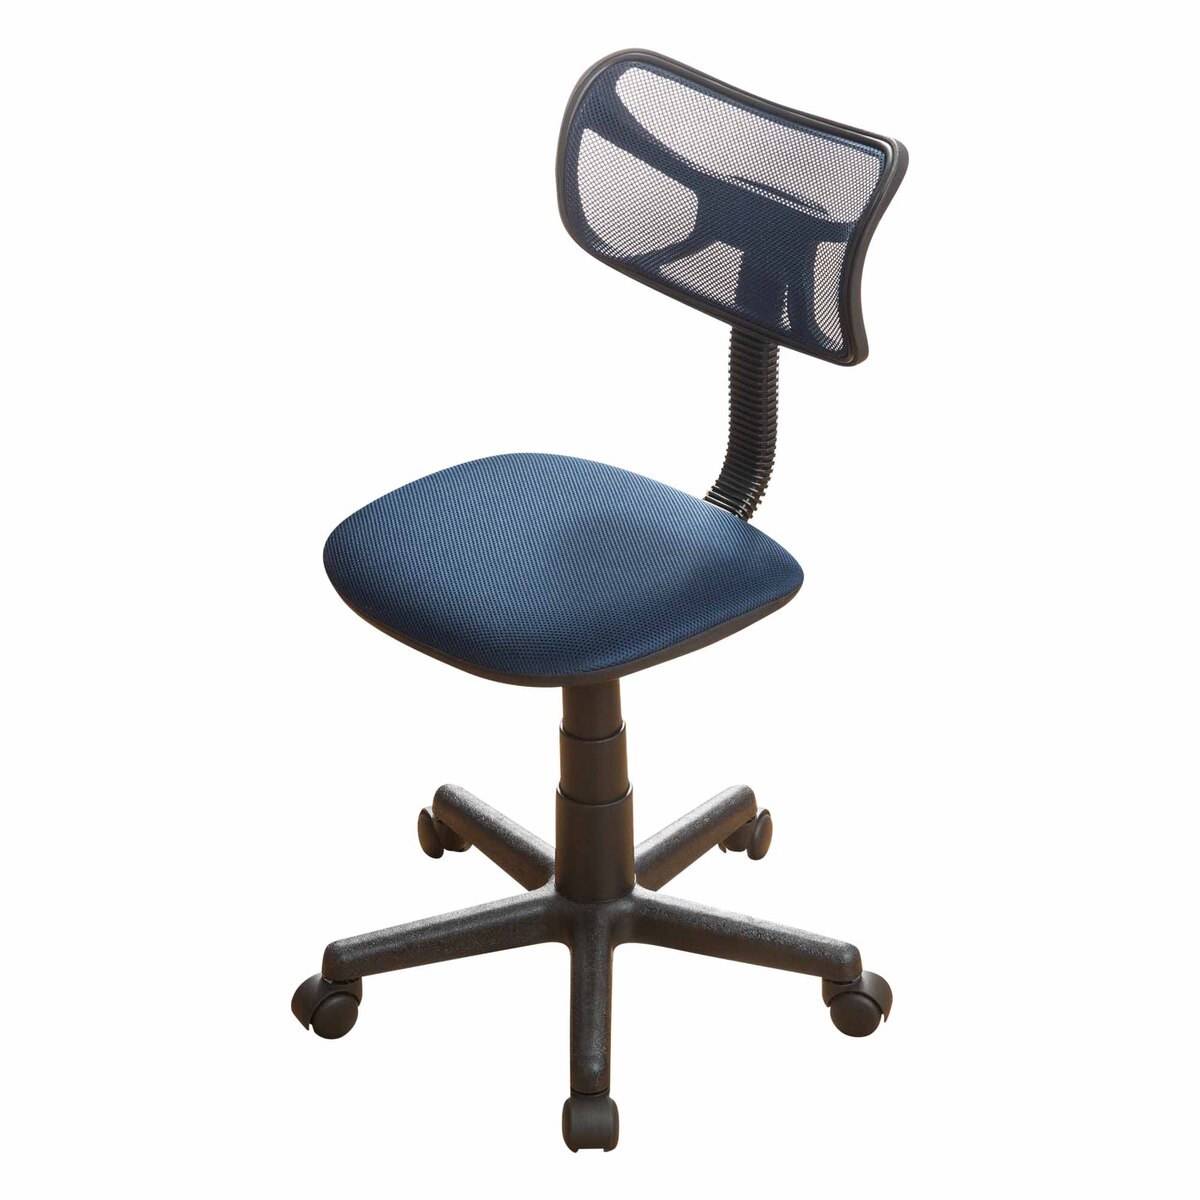 Maple Leaf Adjustable Kids Chair, Office, Computer Chair for Students With Swivel Wheels Navy WK657591